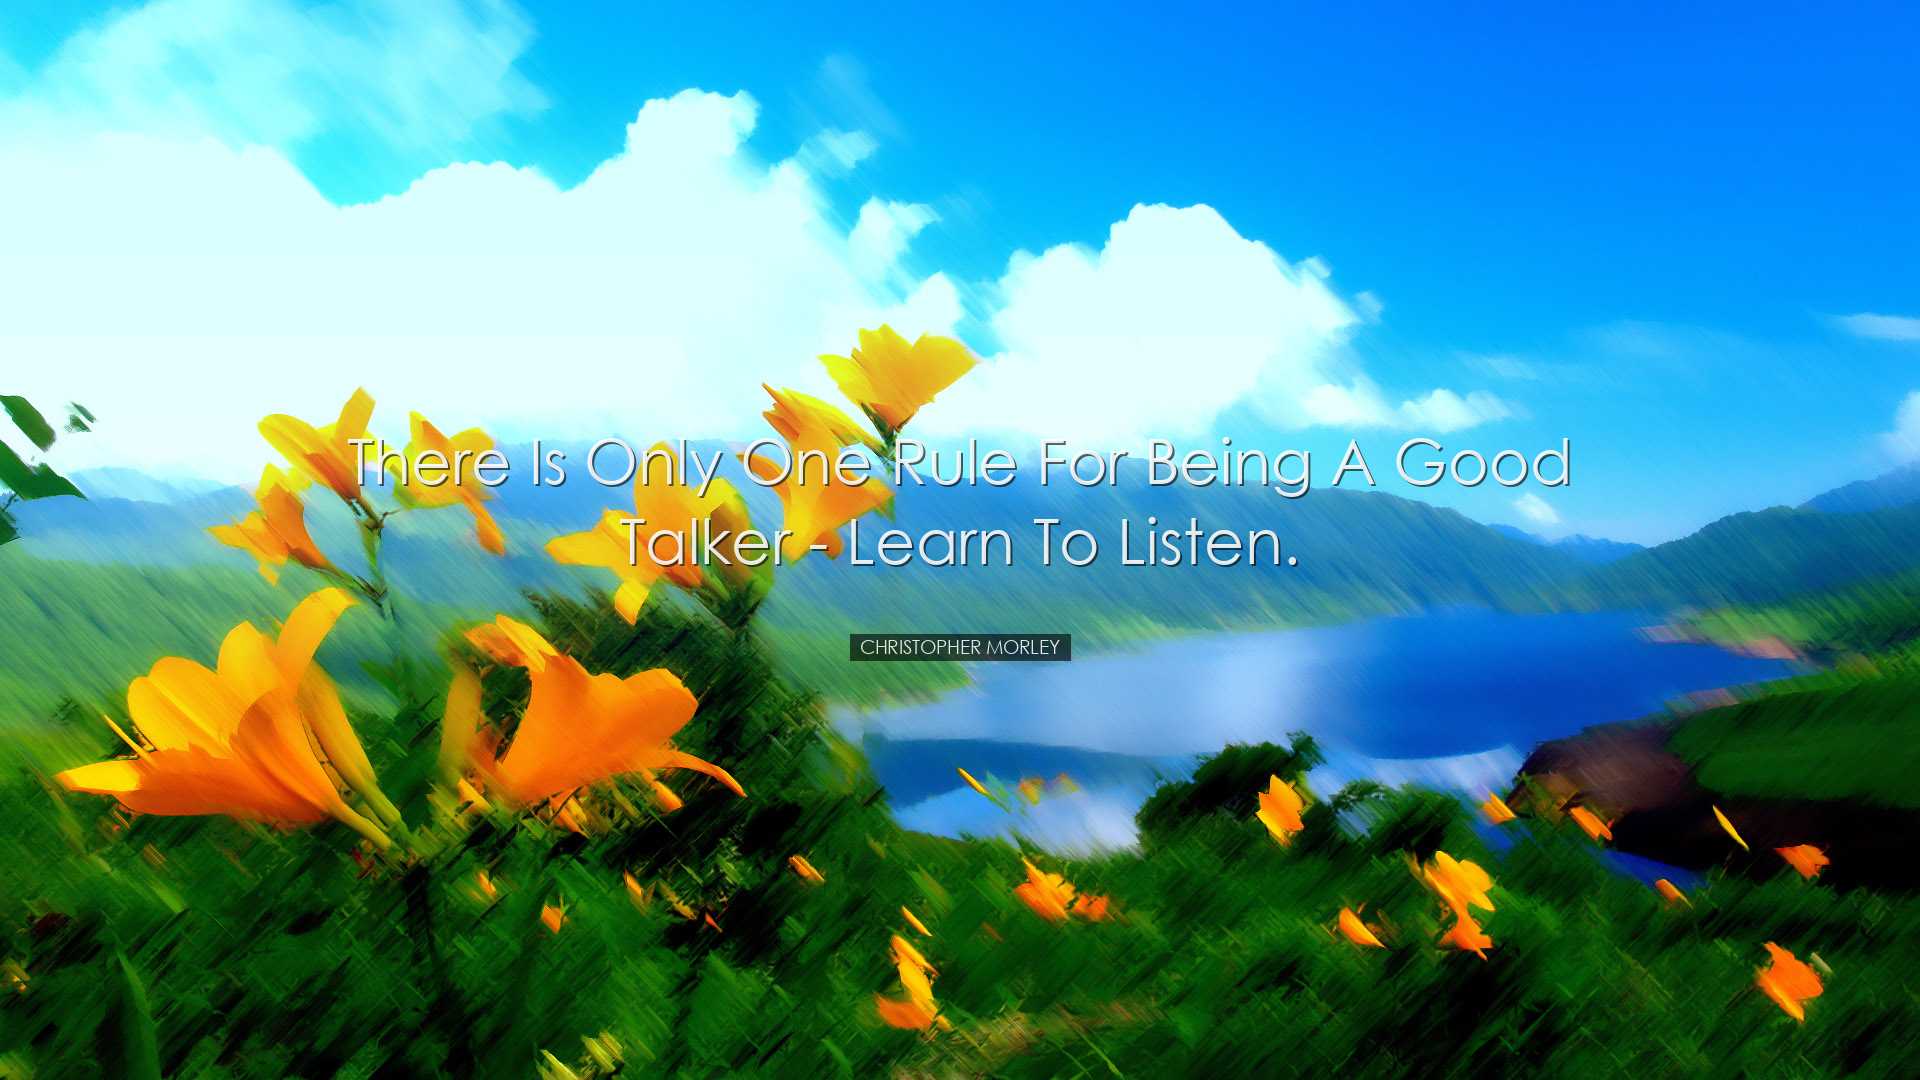 There is only one rule for being a good talker - learn to listen.